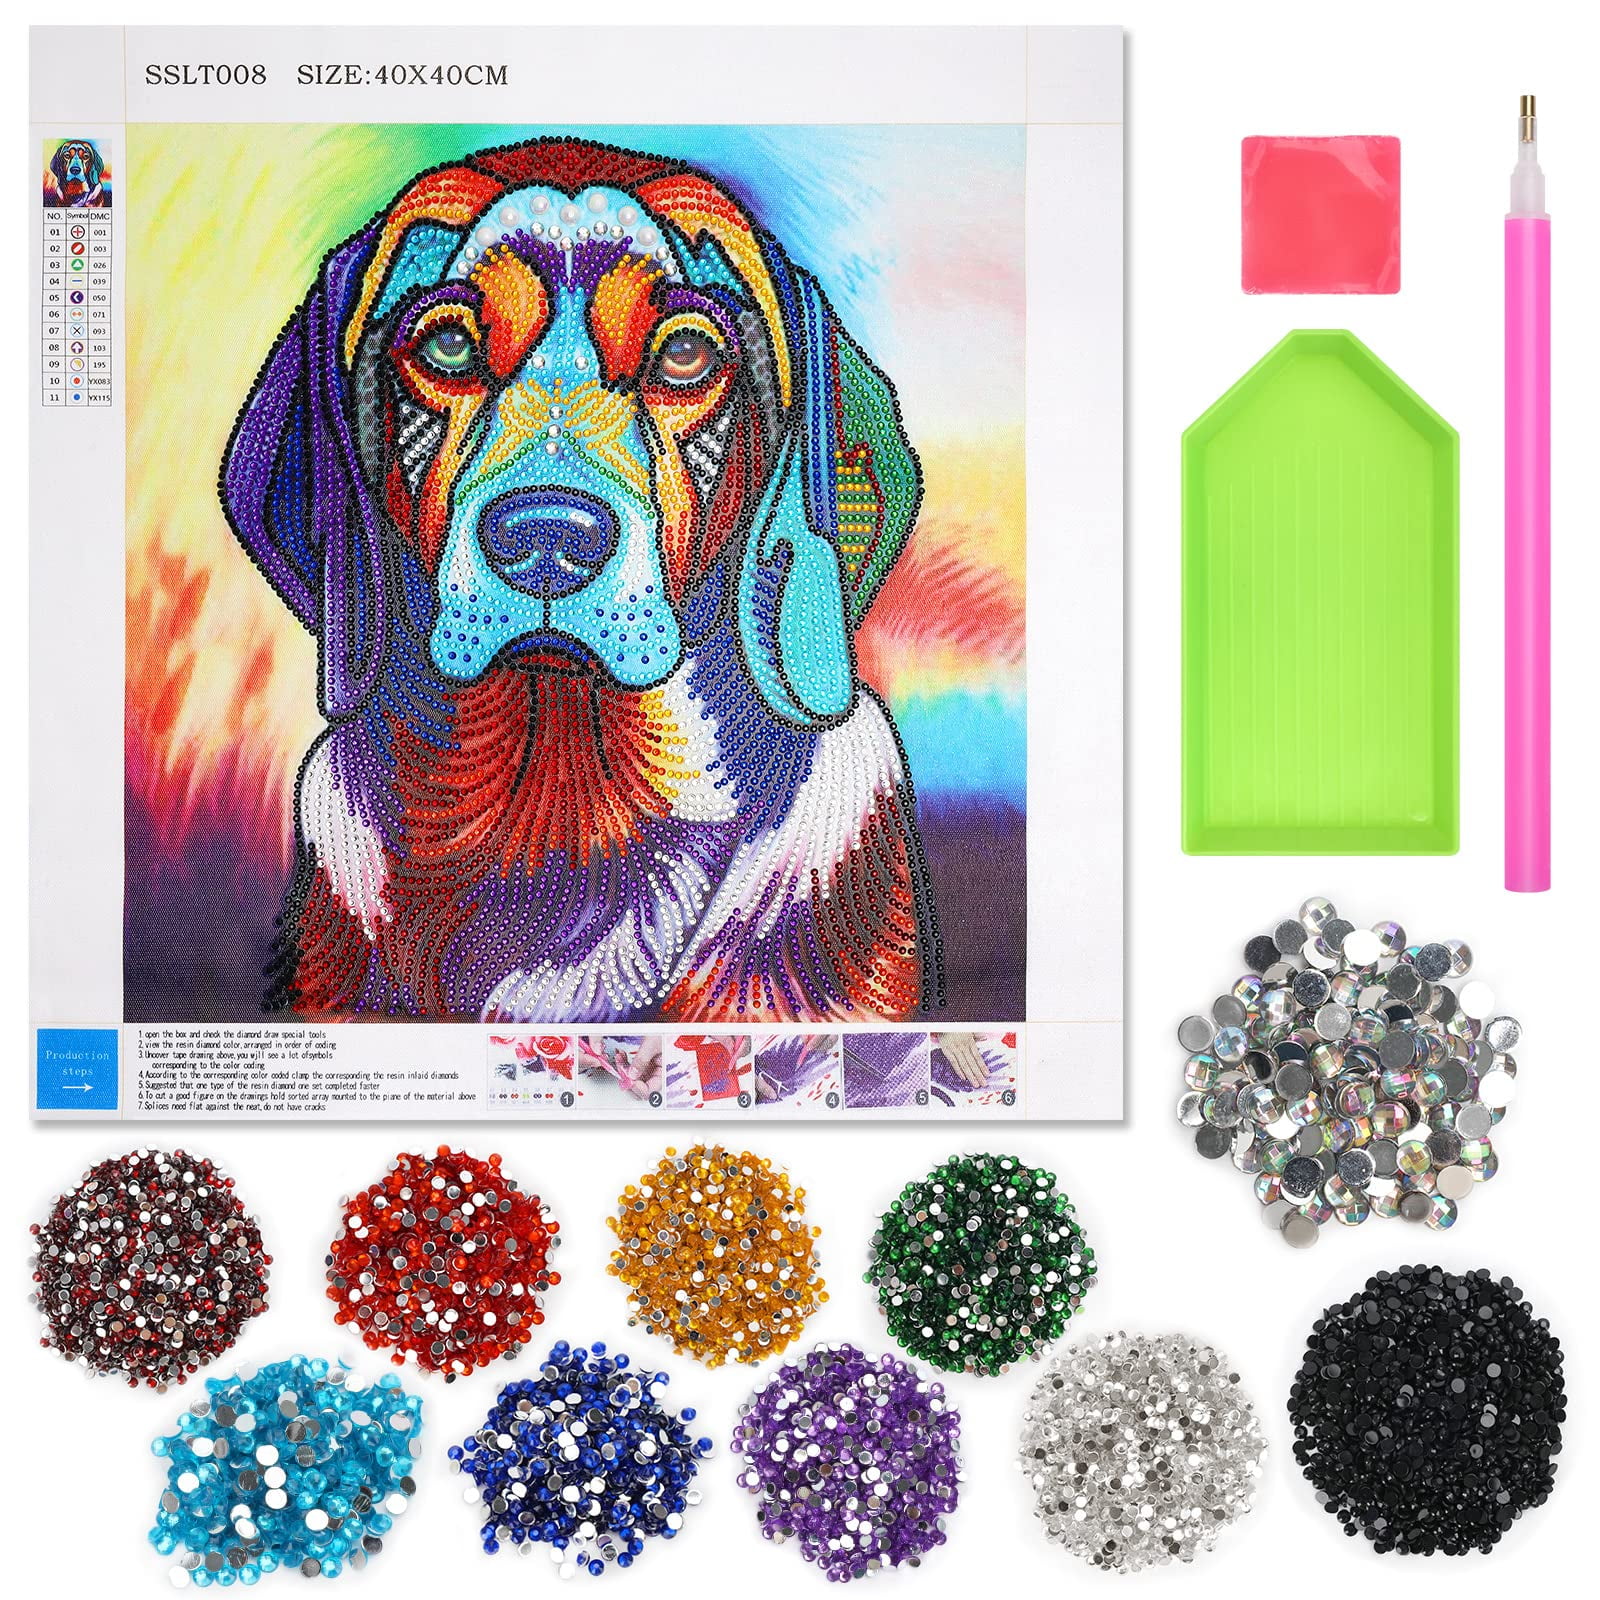 WAHFNG 5D Diamond Painting Kits for Kids- Gem Paint by Numbers Diamonds Arts and Crafts for Boys and Girls Ages 6 7 8 Birthday Gifts Fo